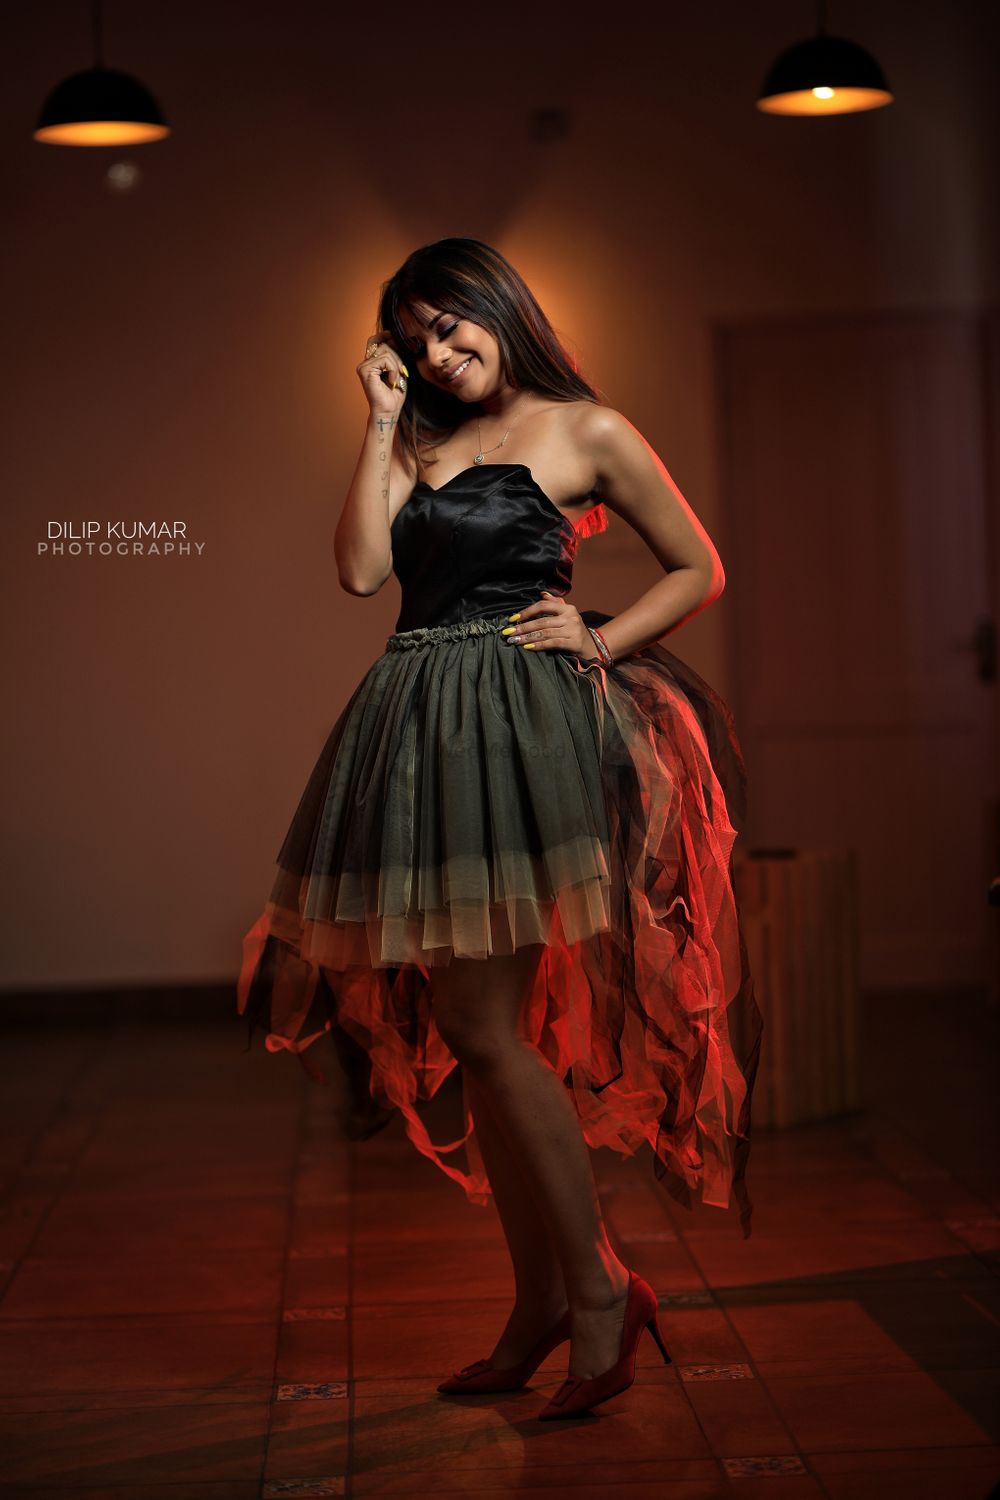 Photo From Fashion - By Dilip Kumar Photography